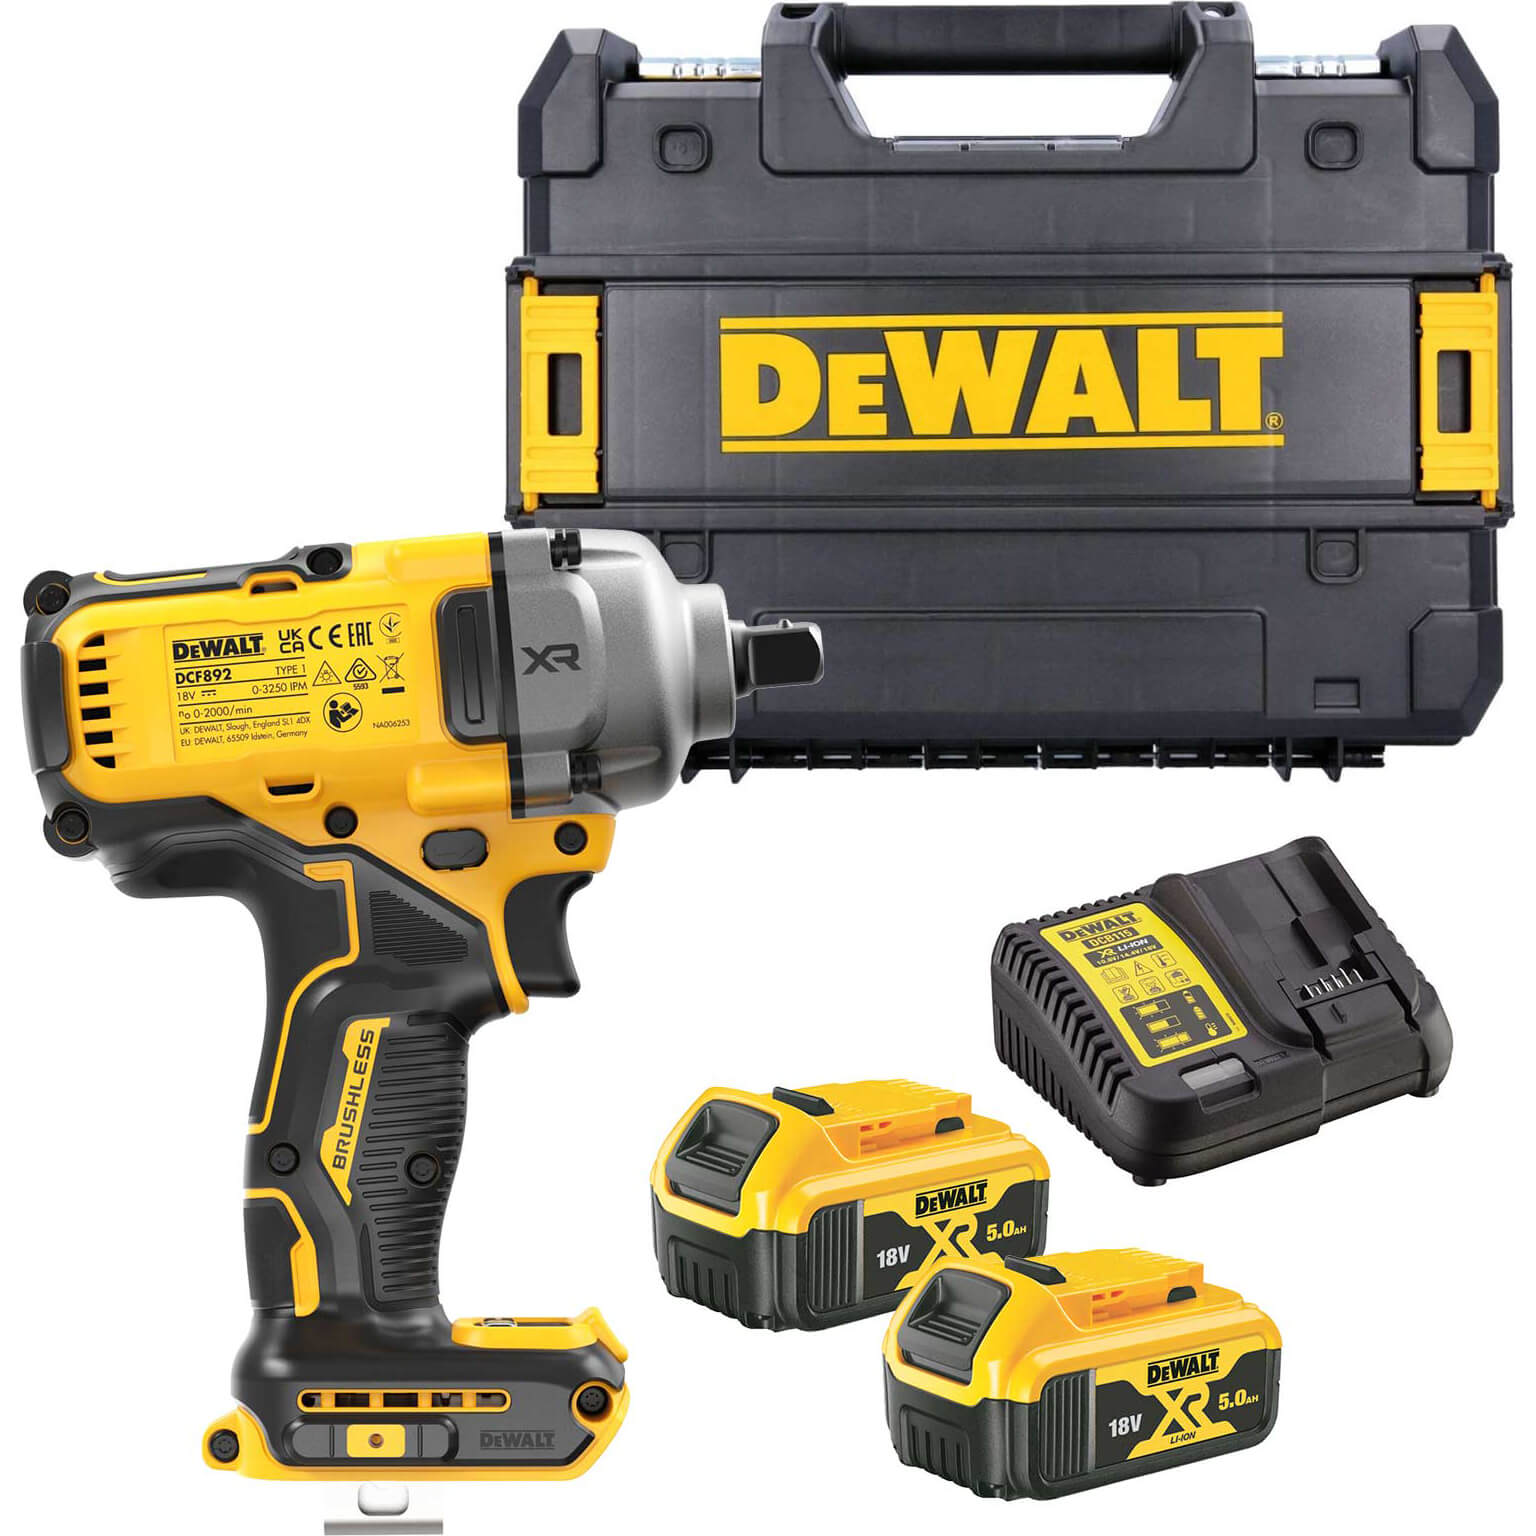 DeWalt DCF892 18v XR Cordless Brushless 1/2" Compact High Torque Wrench 2 x 5ah Li-ion Charger Case